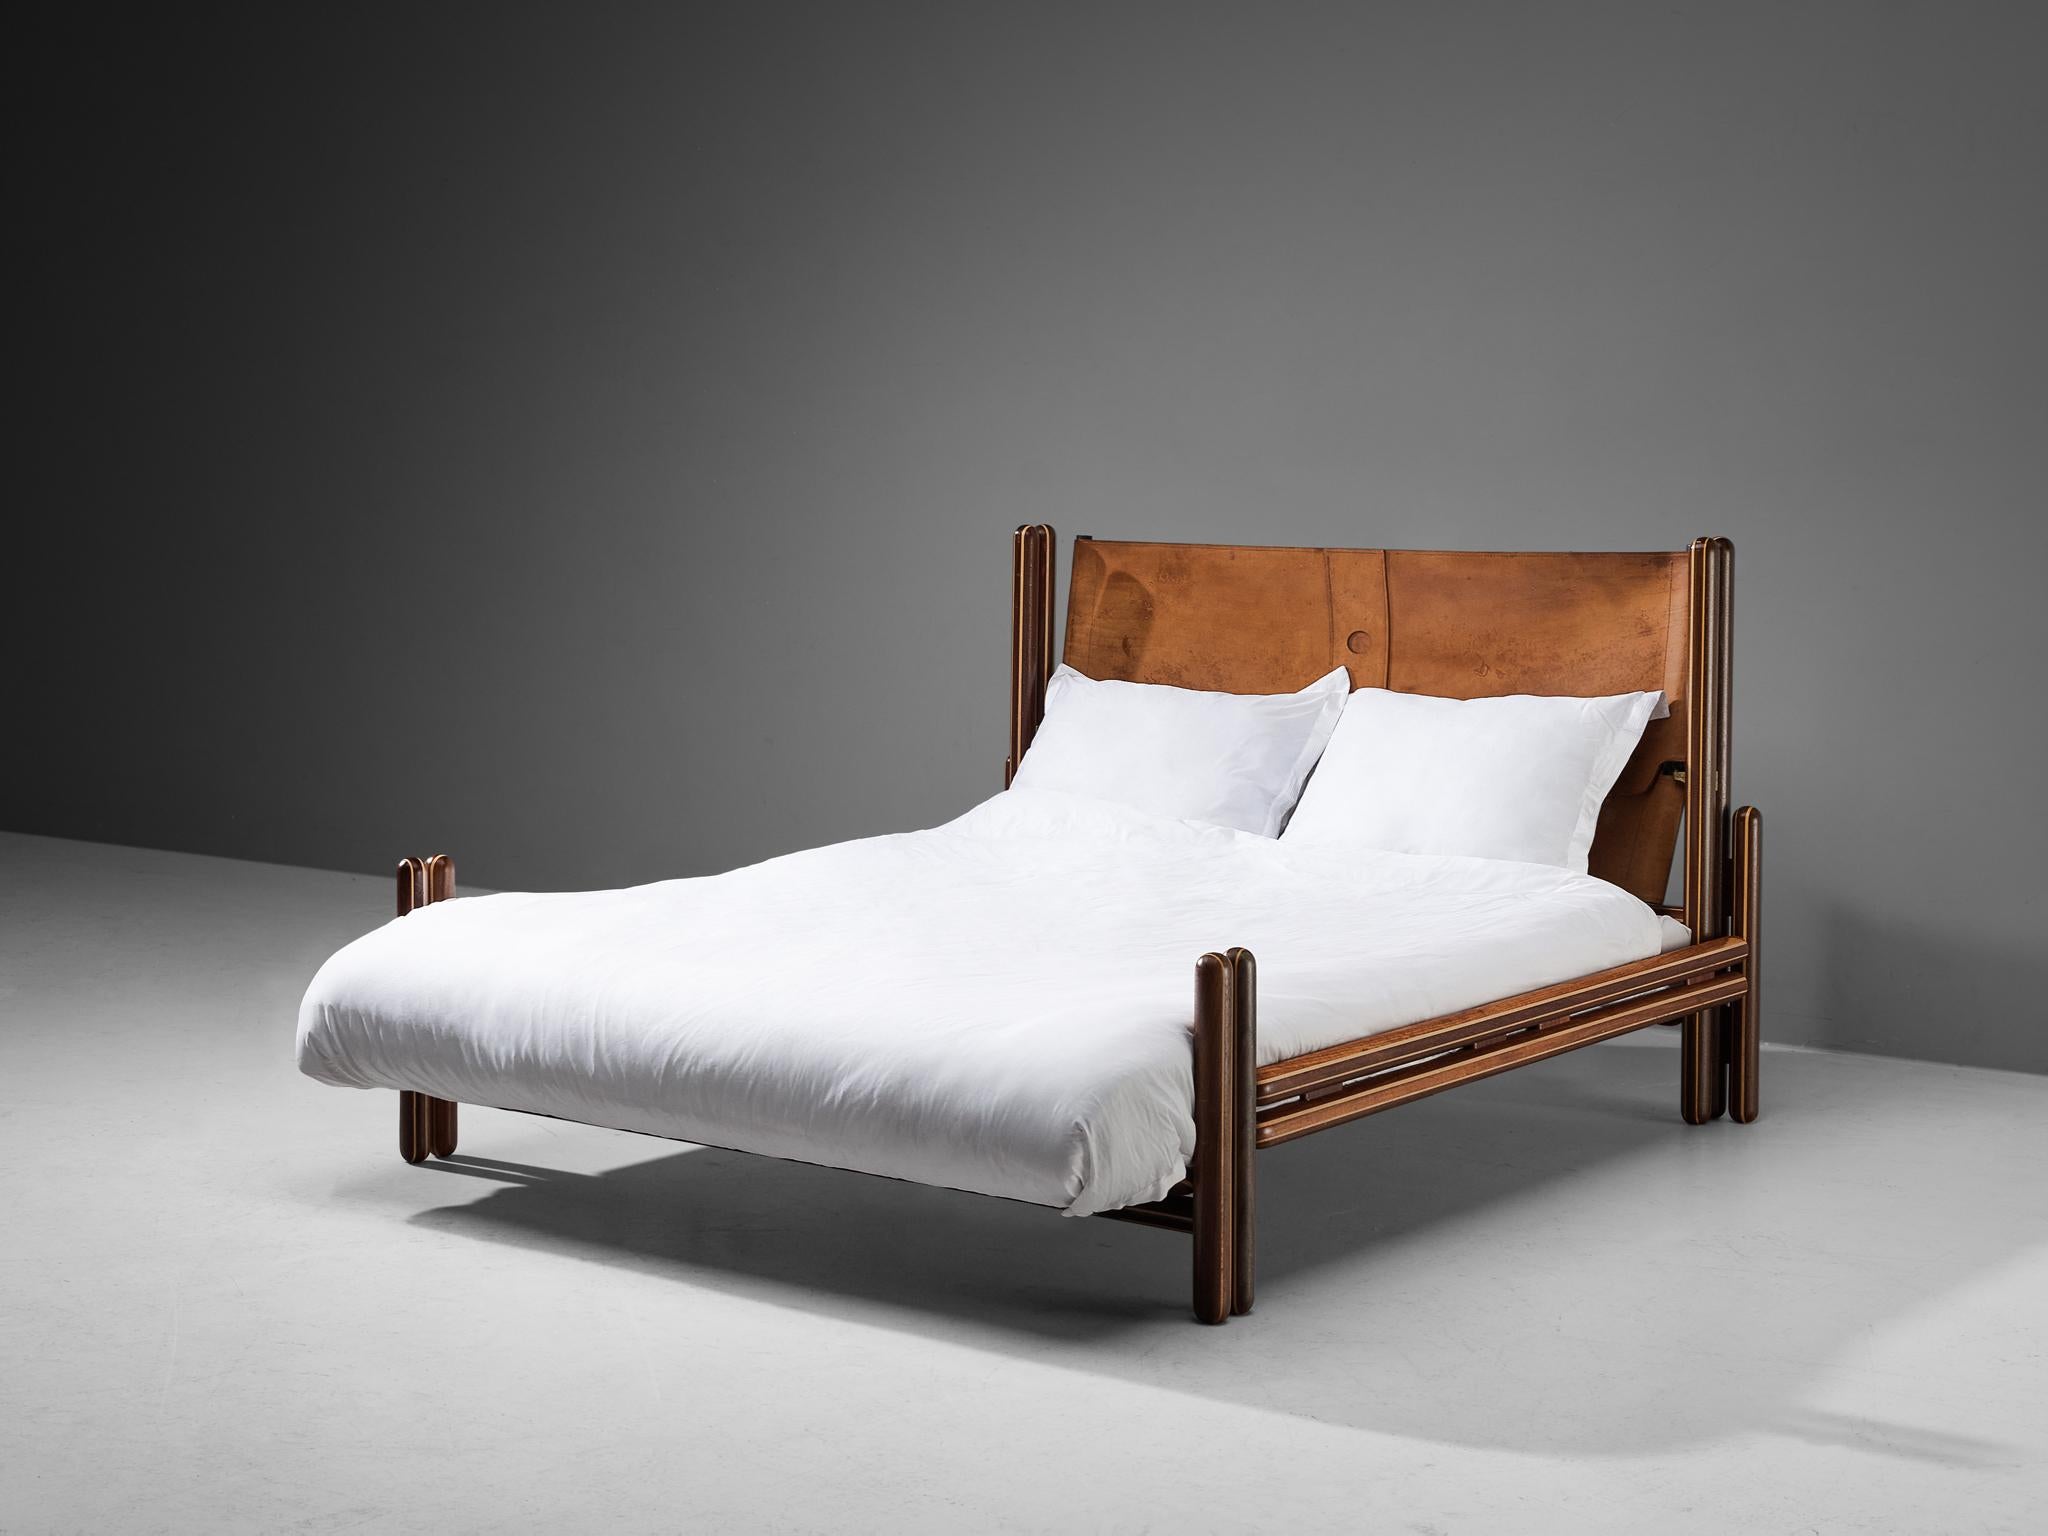 Aluminum Carlo Scarpa for Simon Gavina 'Toledo' Queen Bed in Padouk and Leather 